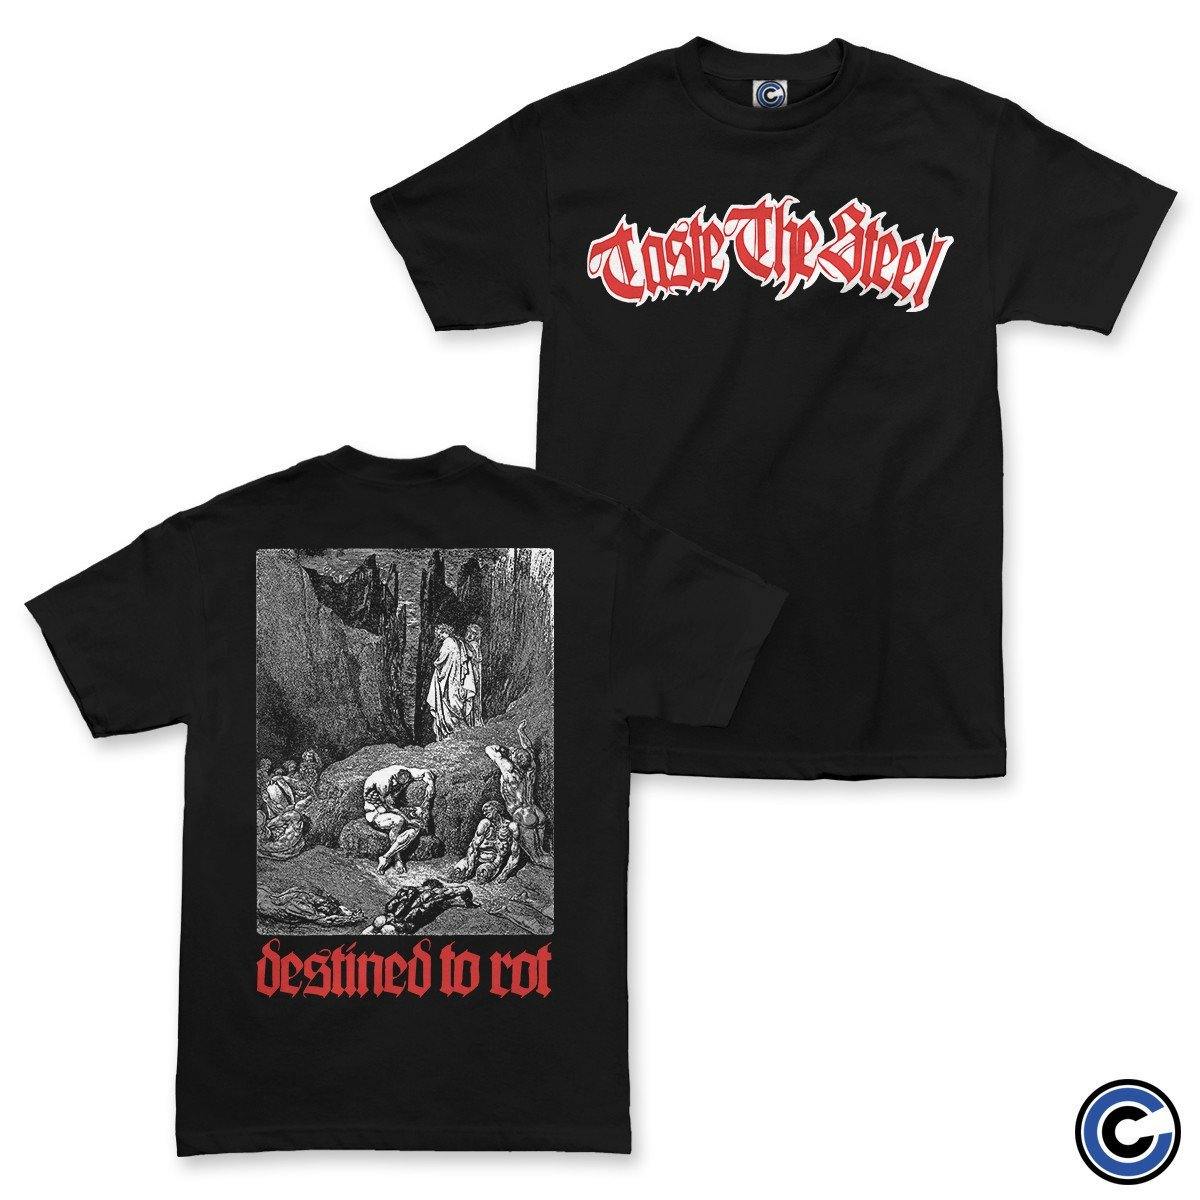 Buy – Taste the Steel "Destined To Rot" Shirt – Band & Music Merch – Cold Cuts Merch